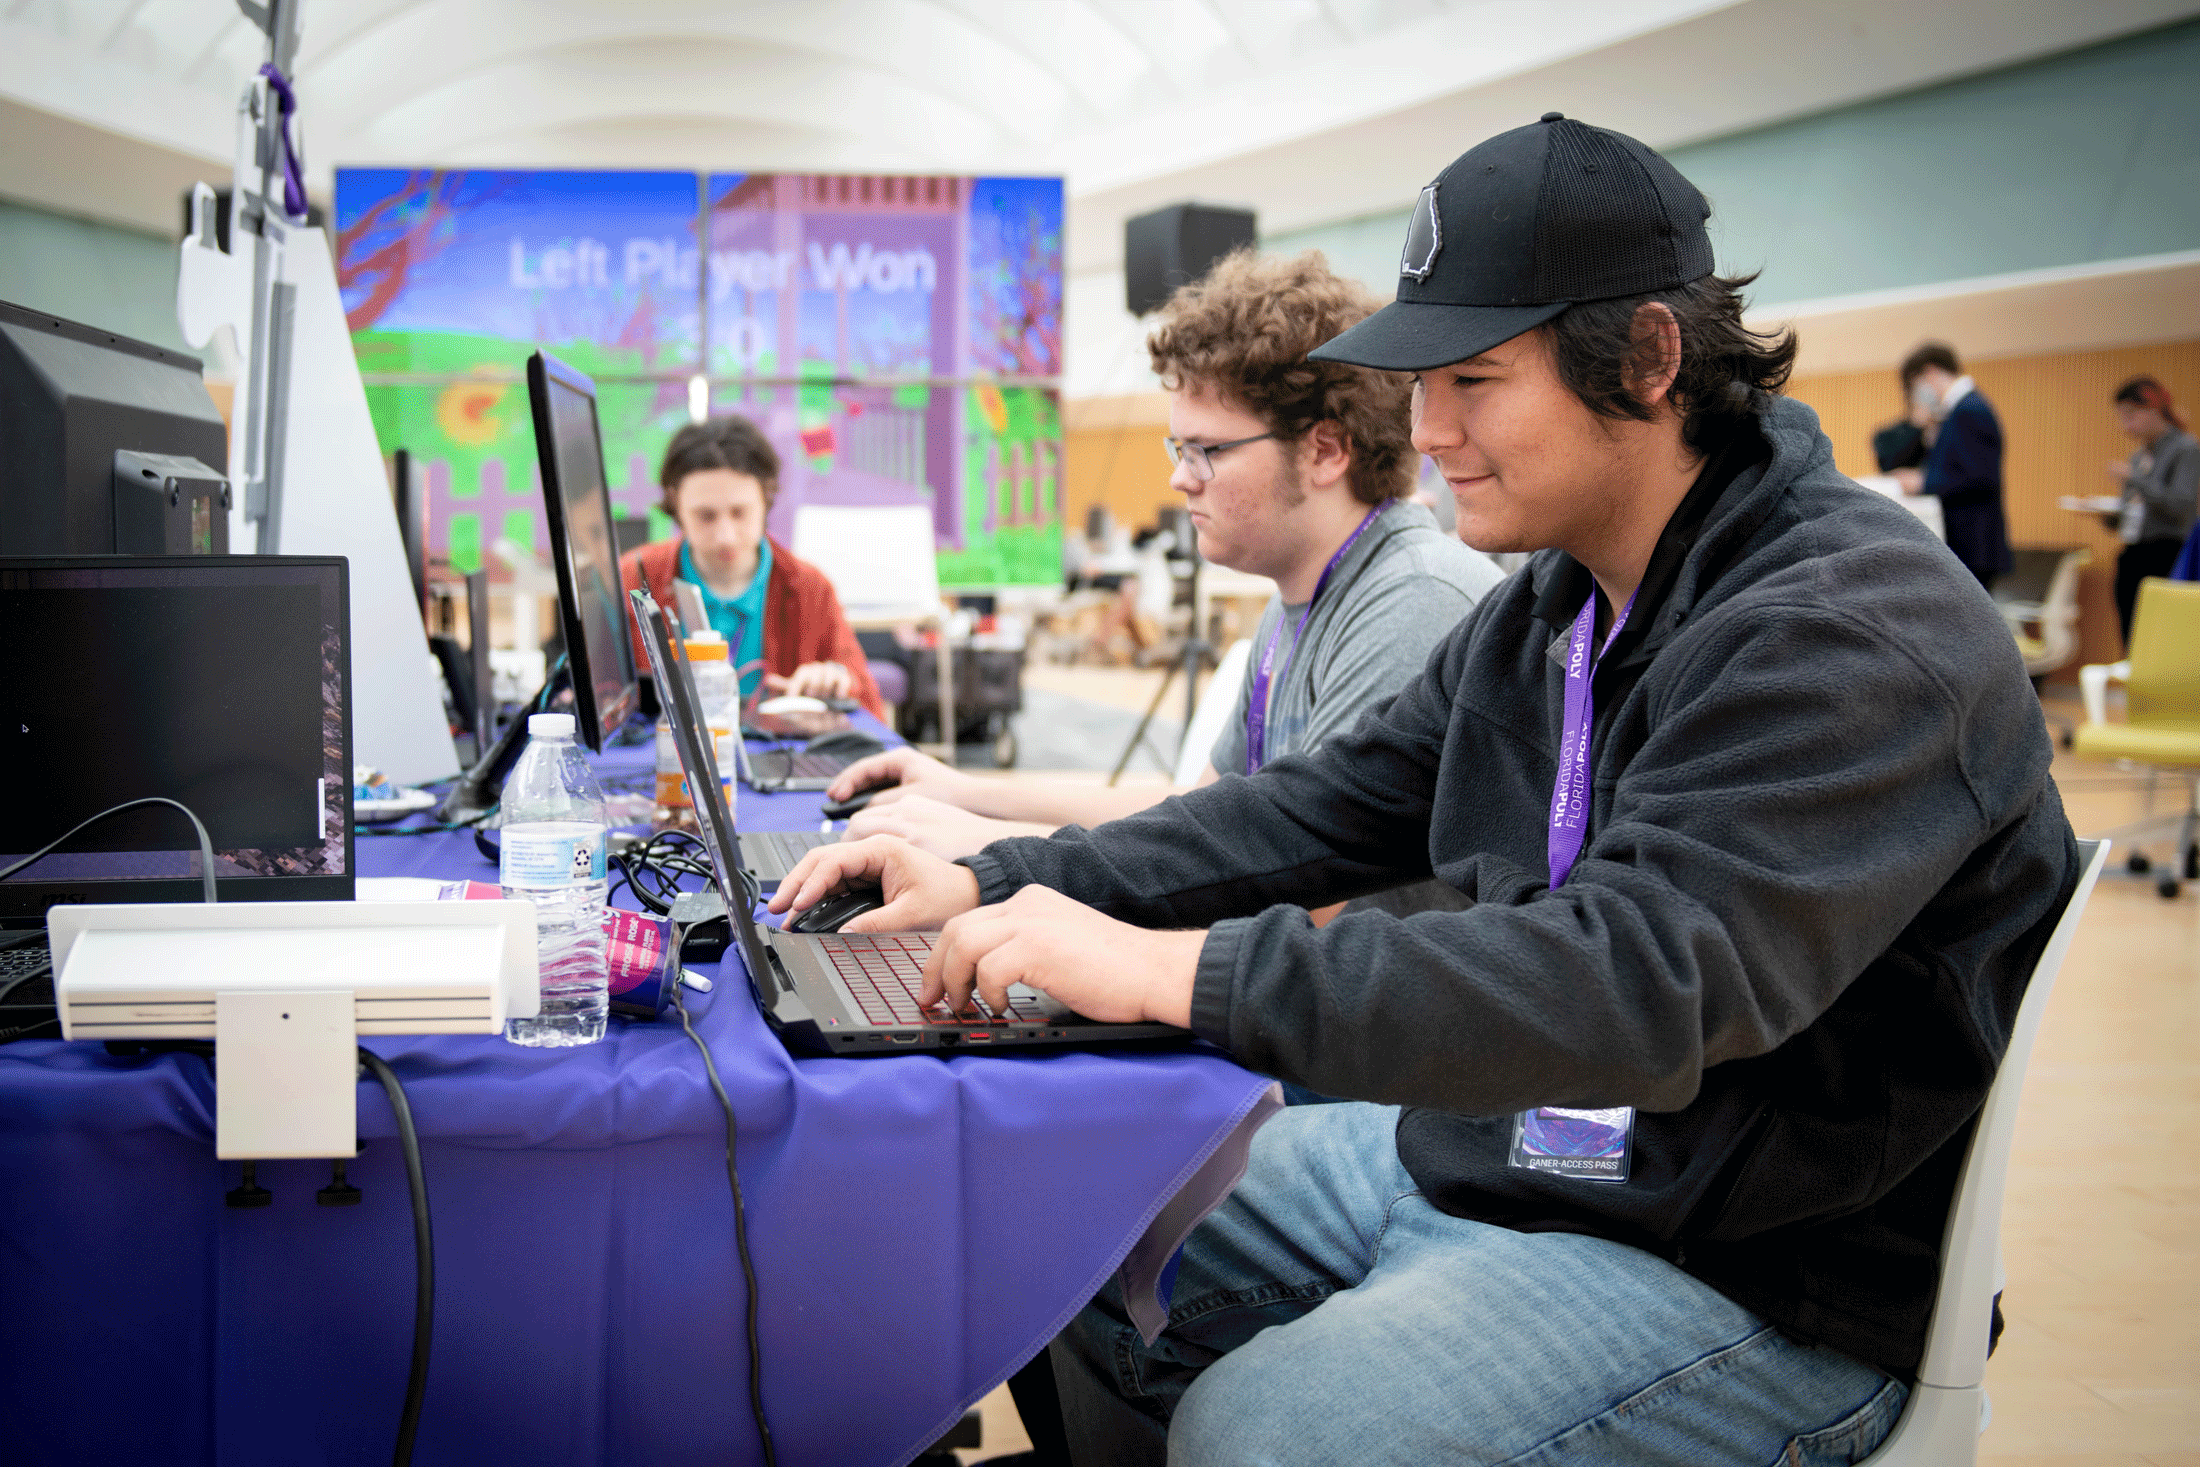 Spring Game Expo draws hundreds to try newest student video games